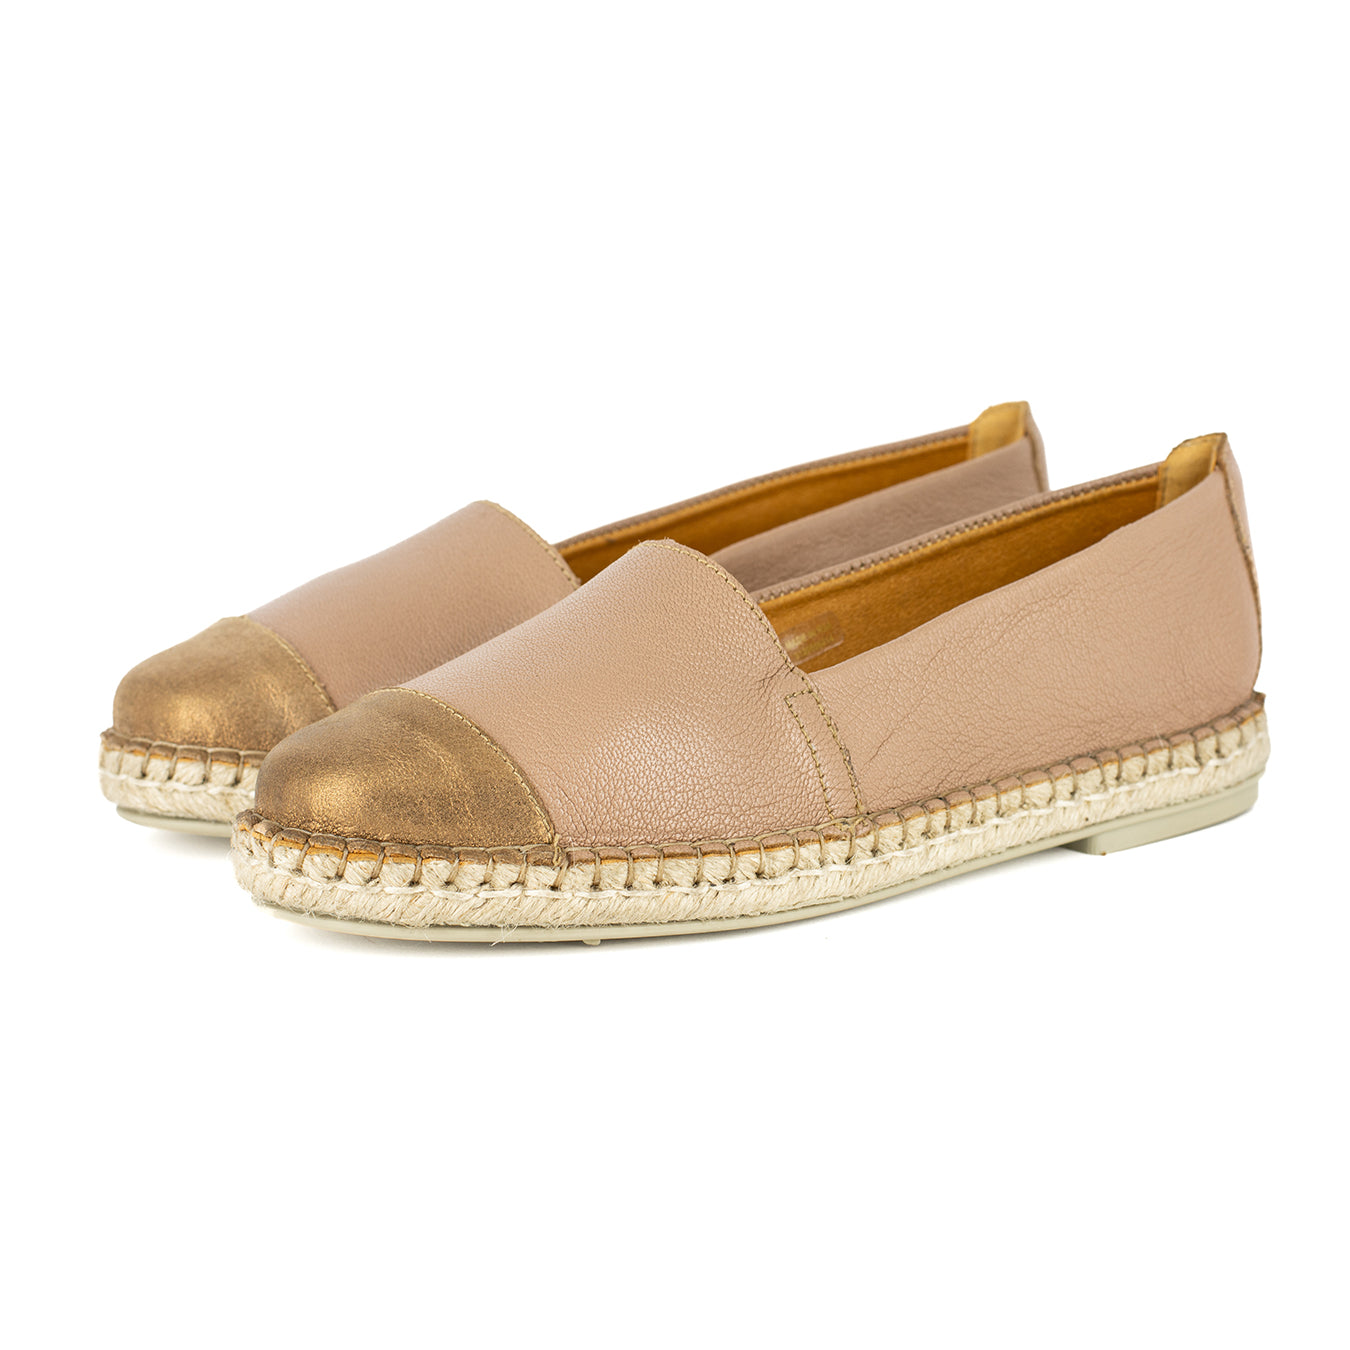 Consisela : Ladies Leather Espadrille Shoe in Timber Cayak & Beige Spi ...